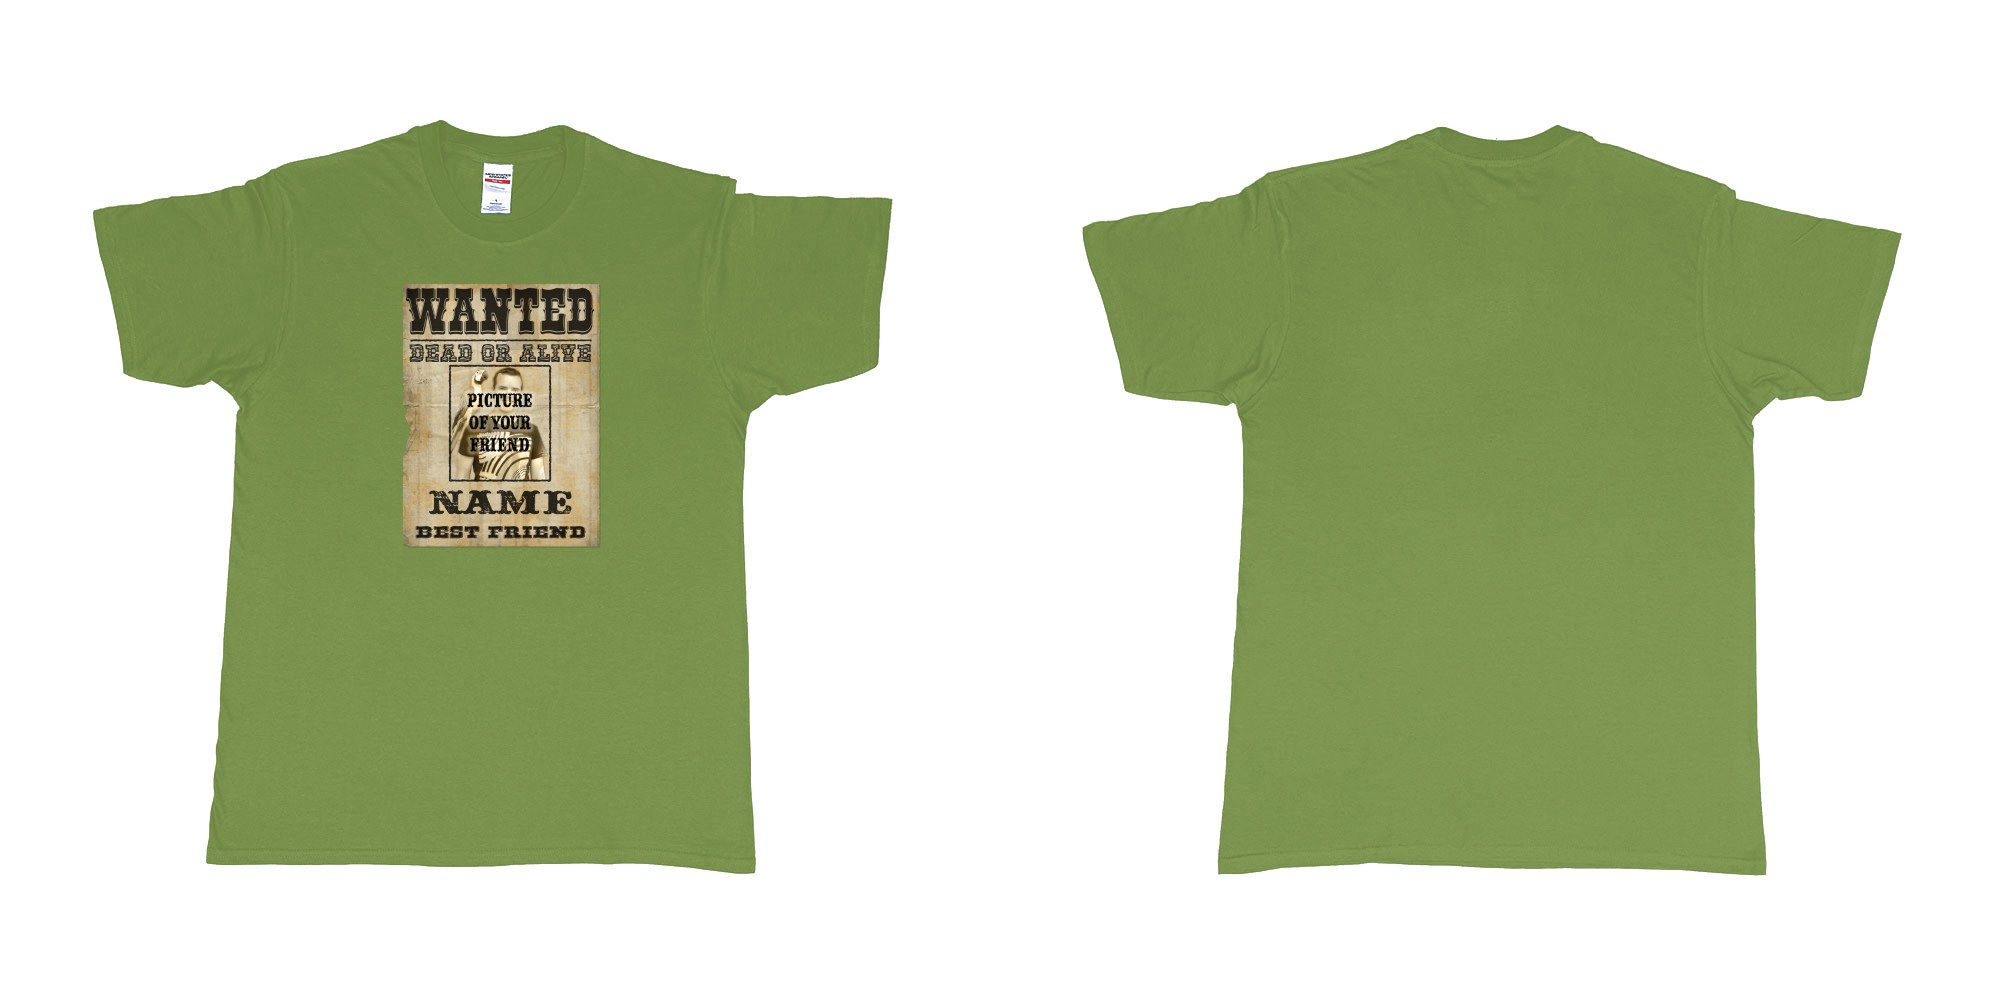 Custom tshirt design Wanted Poster in fabric color military-green choice your own text made in Bali by The Pirate Way